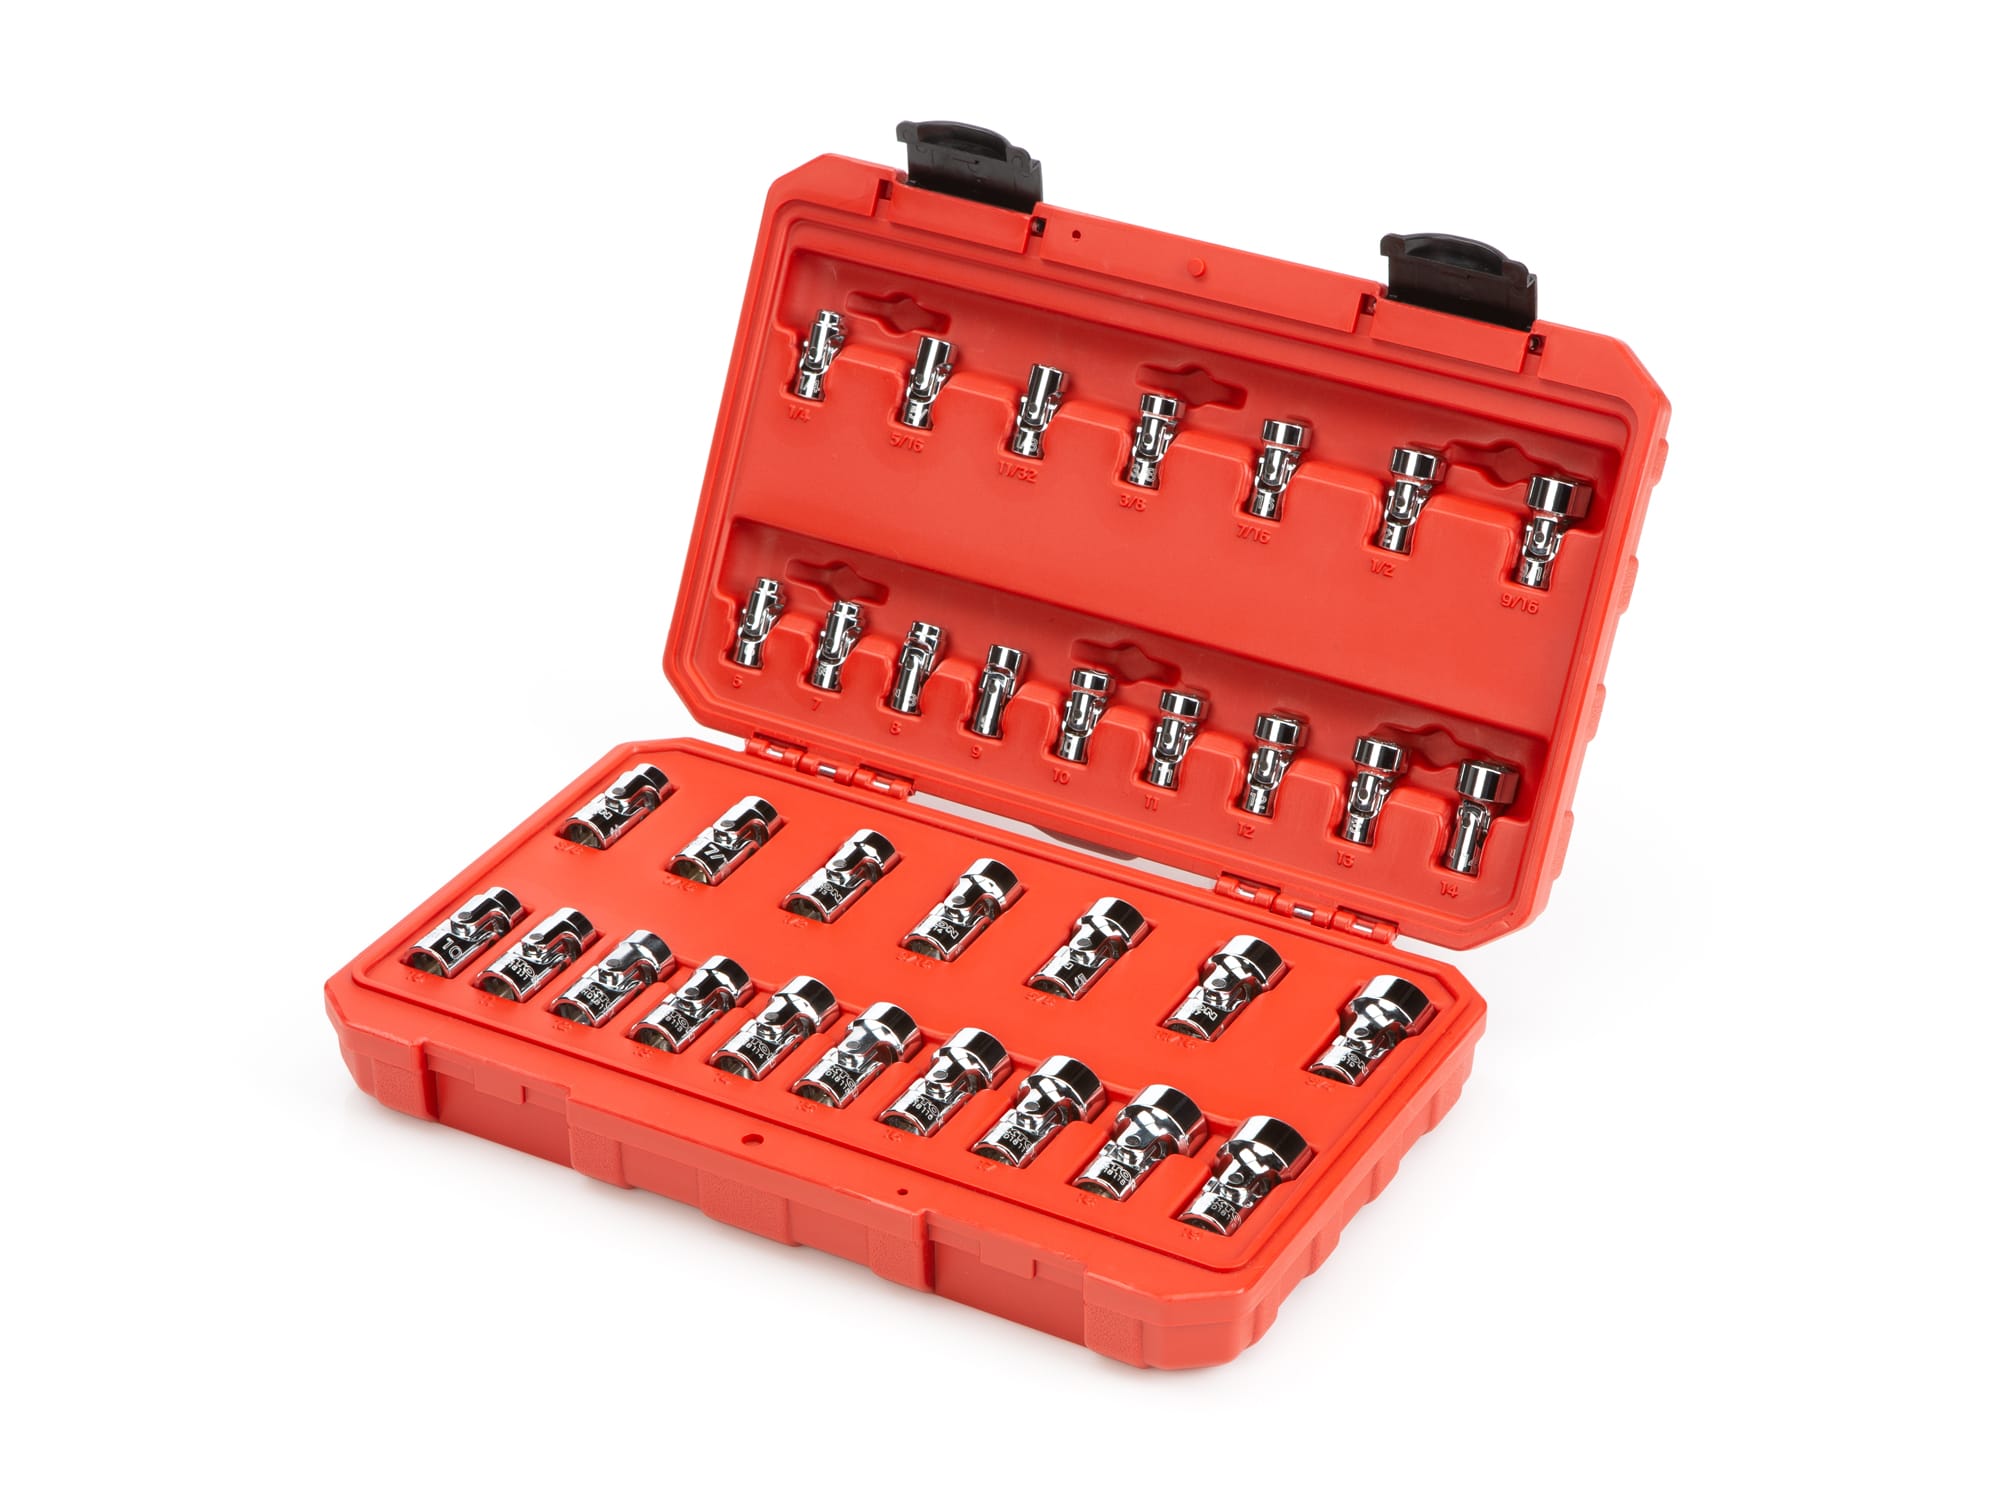 1/4, 3/8 Inch Drive Universal Joint Socket Set, 33-Piece (1/4-3/4 in., 6-19  mm)